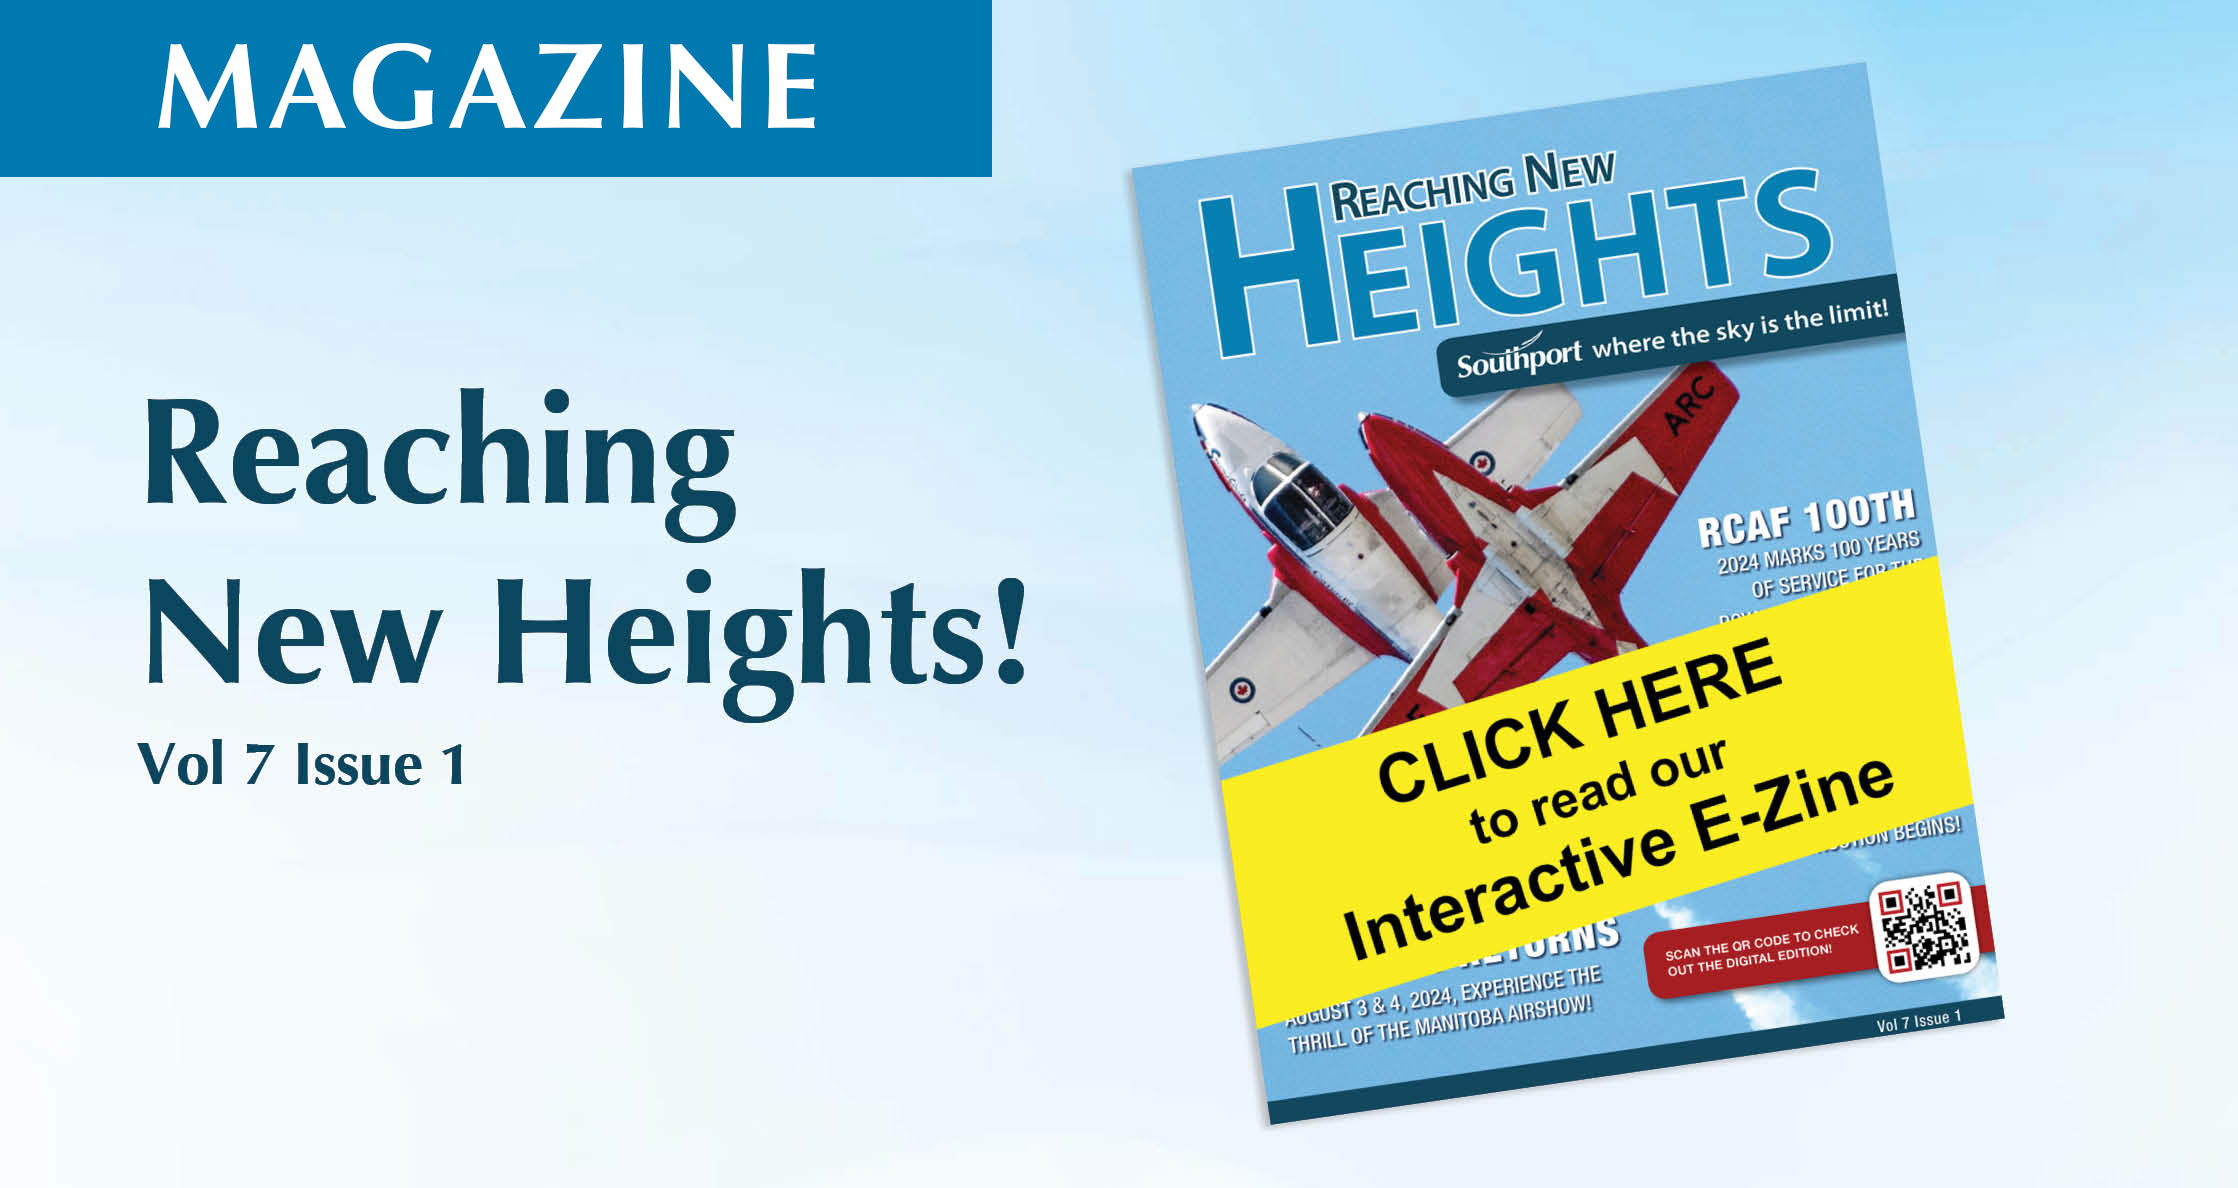 Reaching New Heights. Volume 7 Issue 1